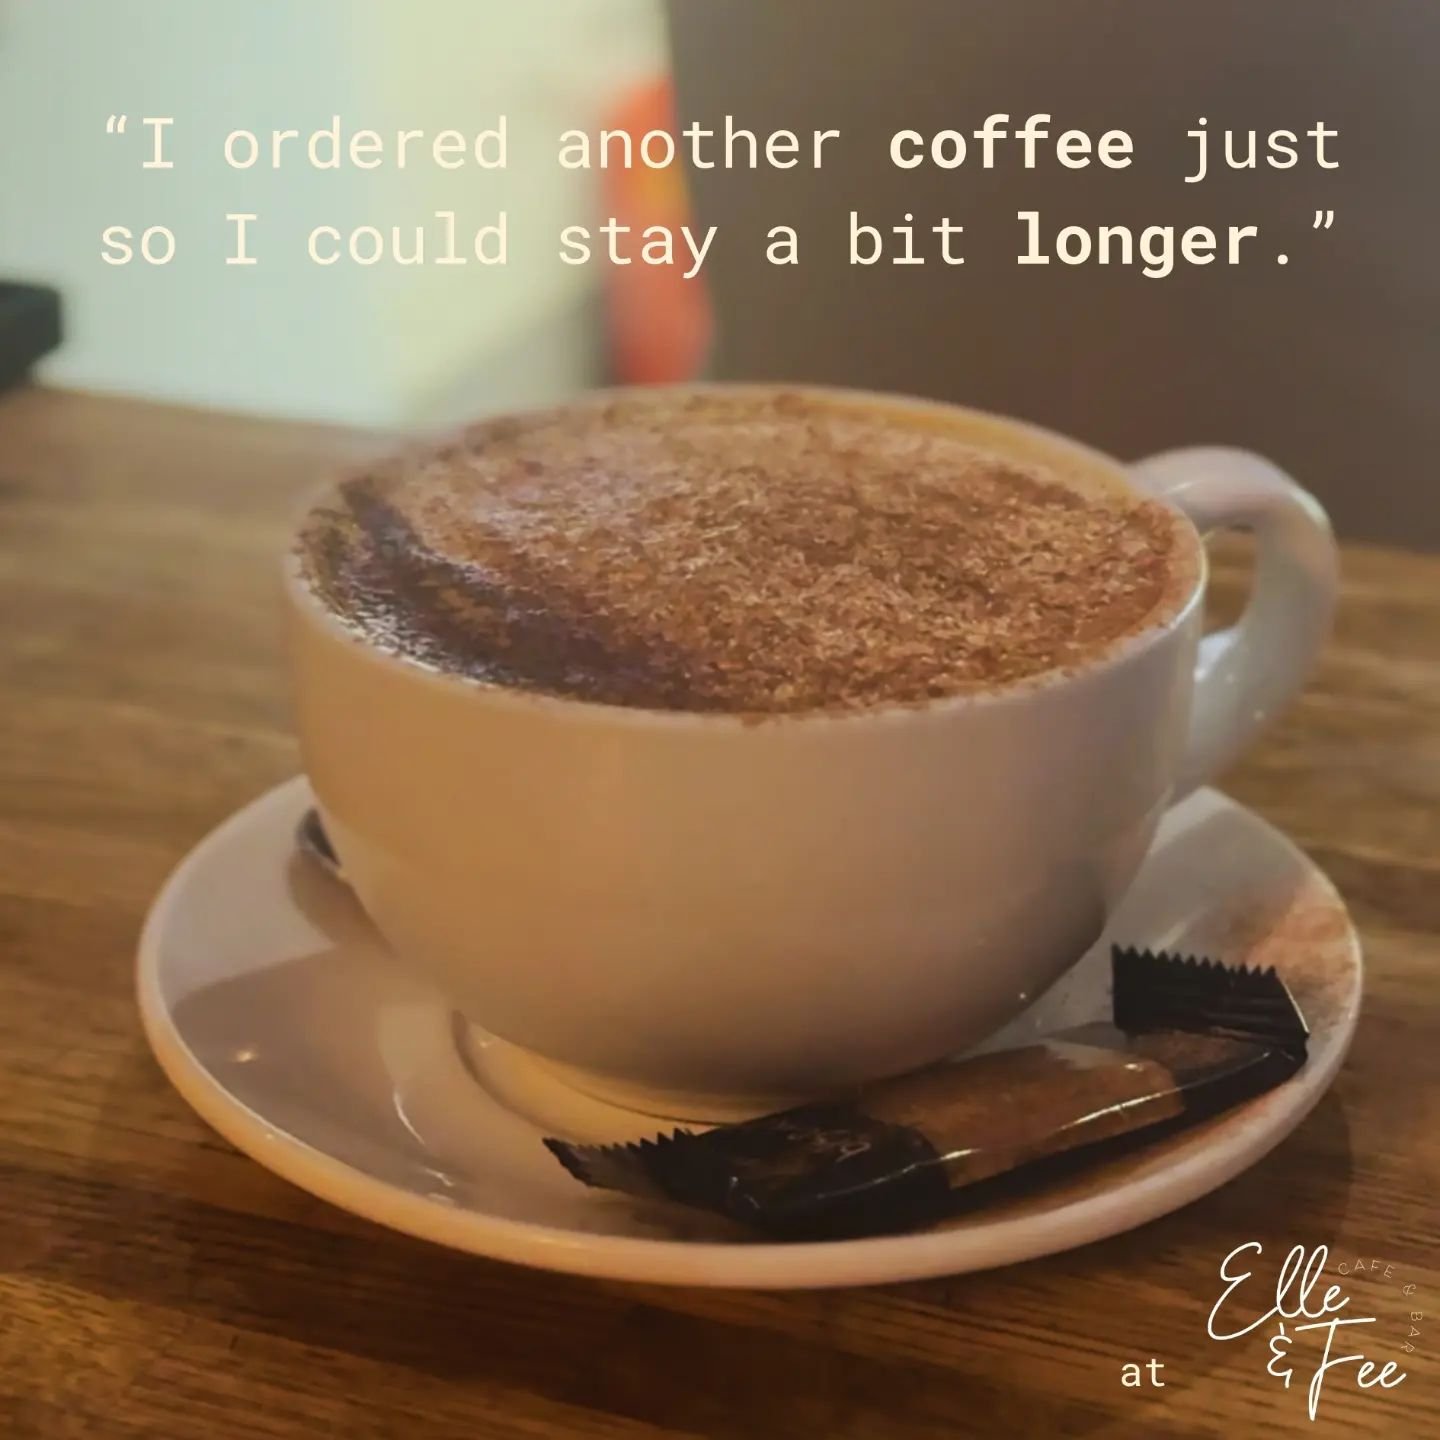 &quot;I ordered another coffee just so I could stay a bit longer.&quot; One coffee is never enough we think, and with a slice of cake would start your week off perfectly.